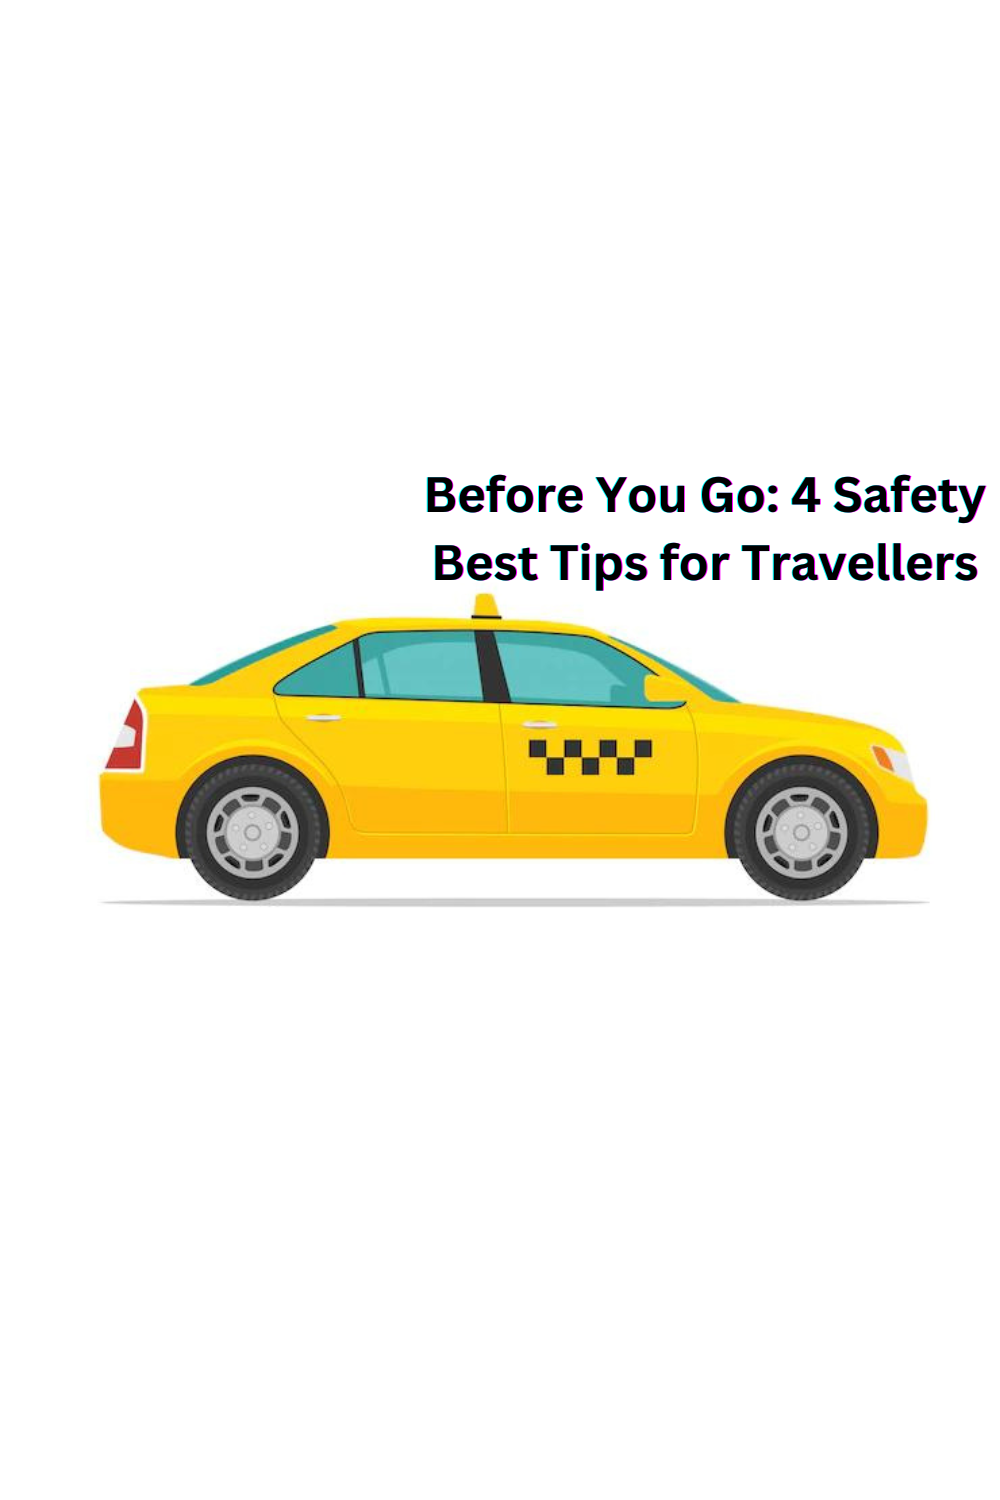 Before You Go: 4 Safety Best Tips for Travellers